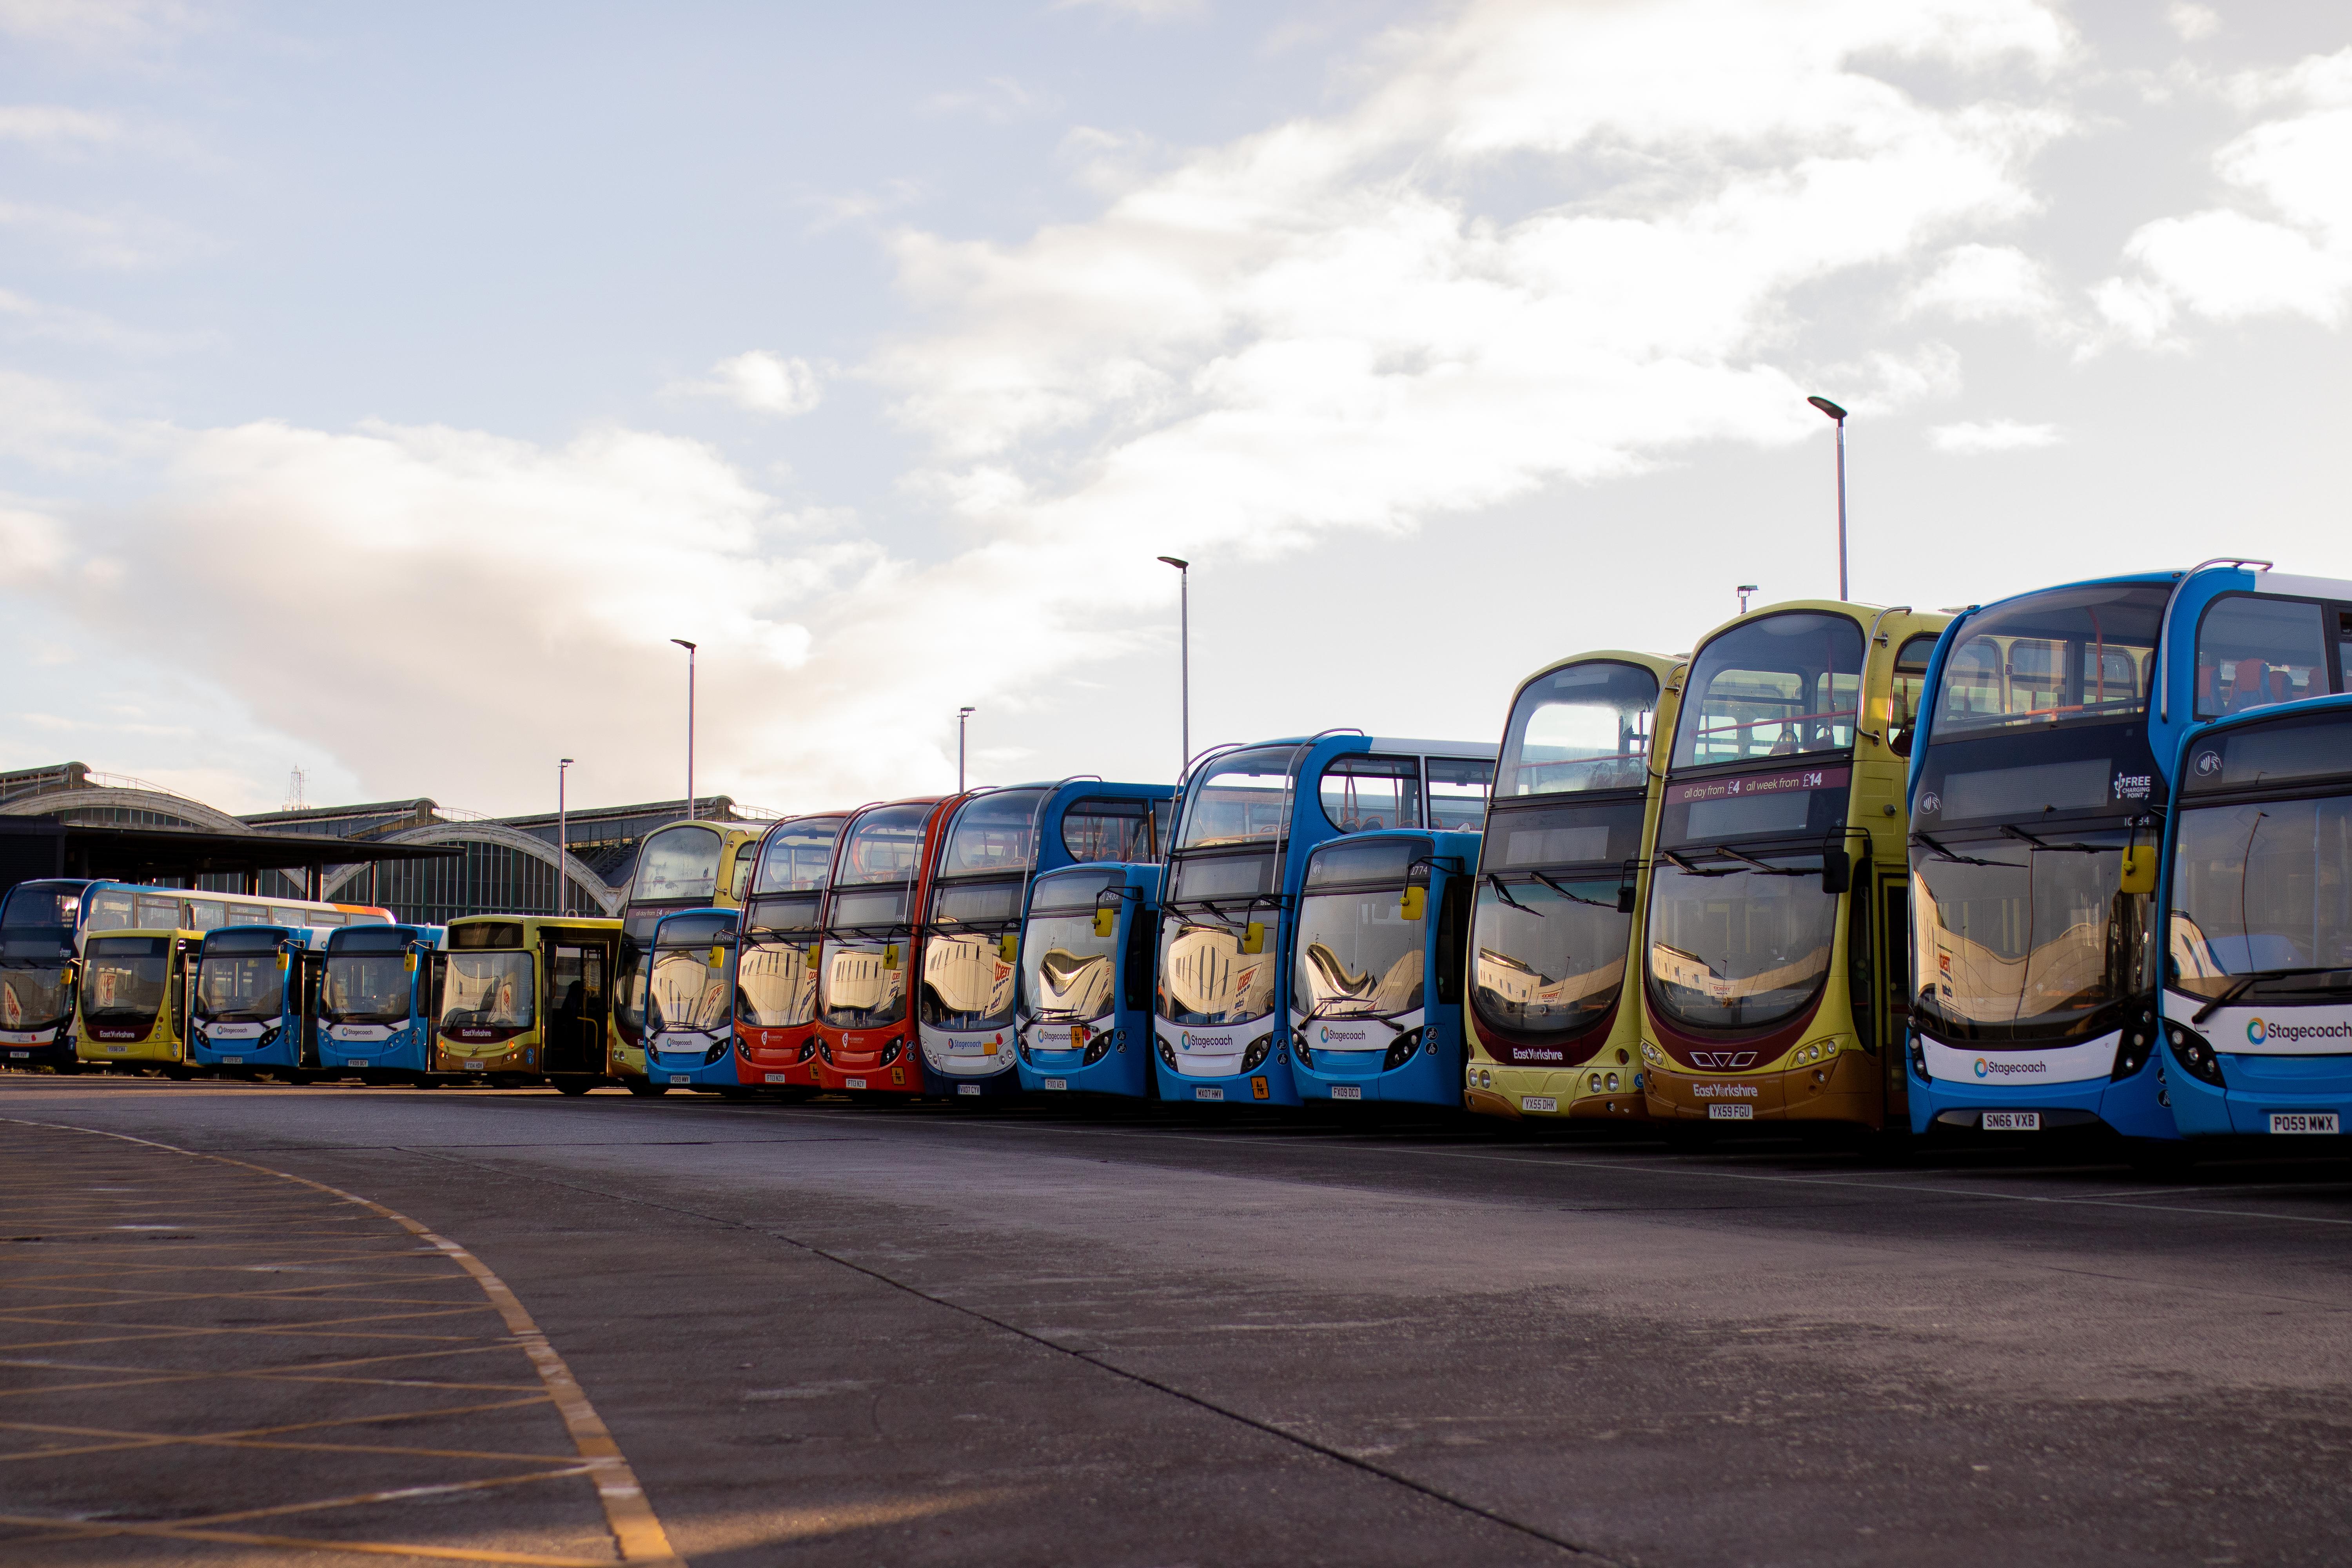 Image of the buses at the Hull Depot